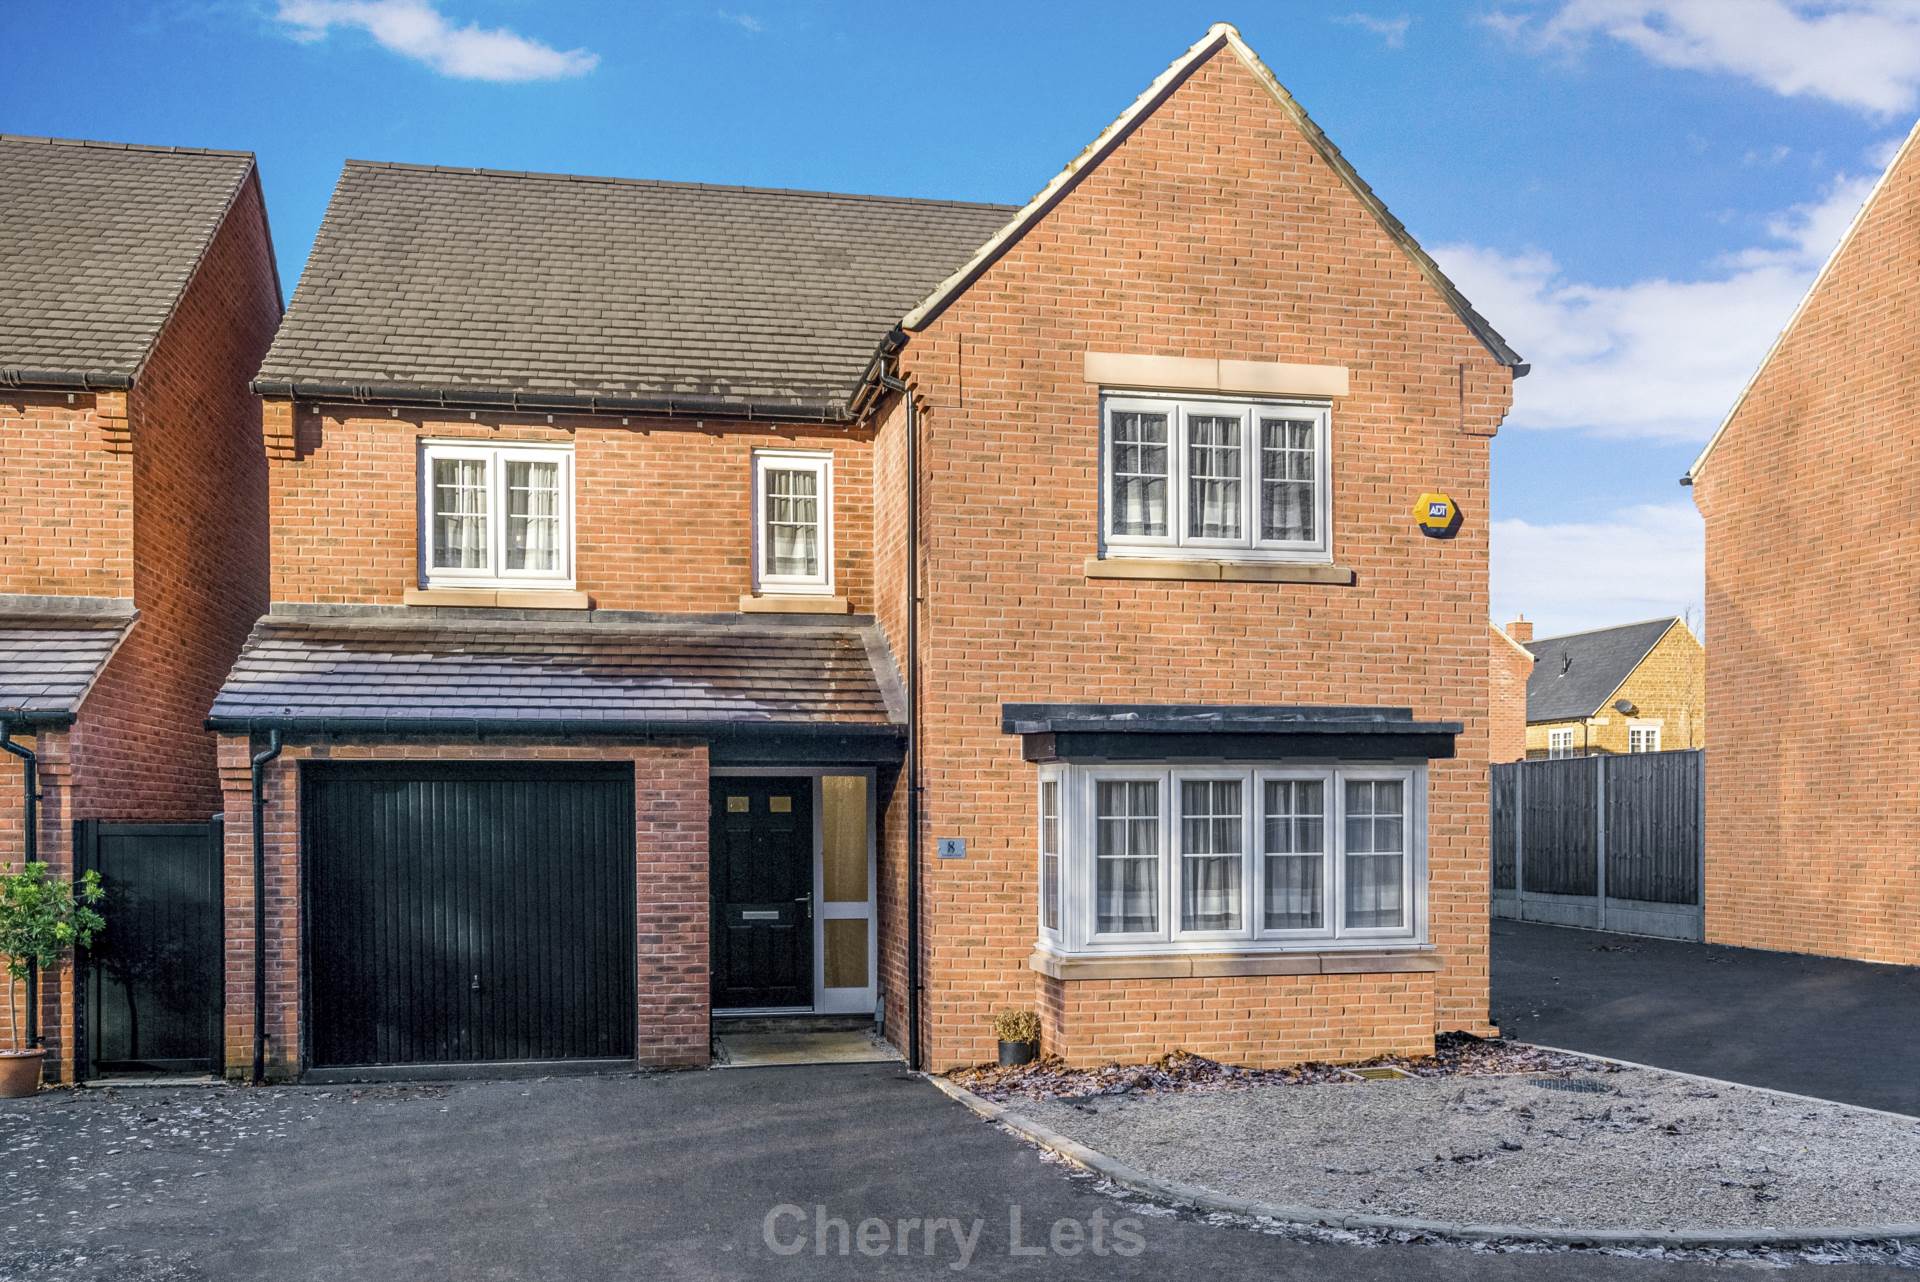 4 bed detached house to rent in Yeoman Close, Banbury - Property Image 1